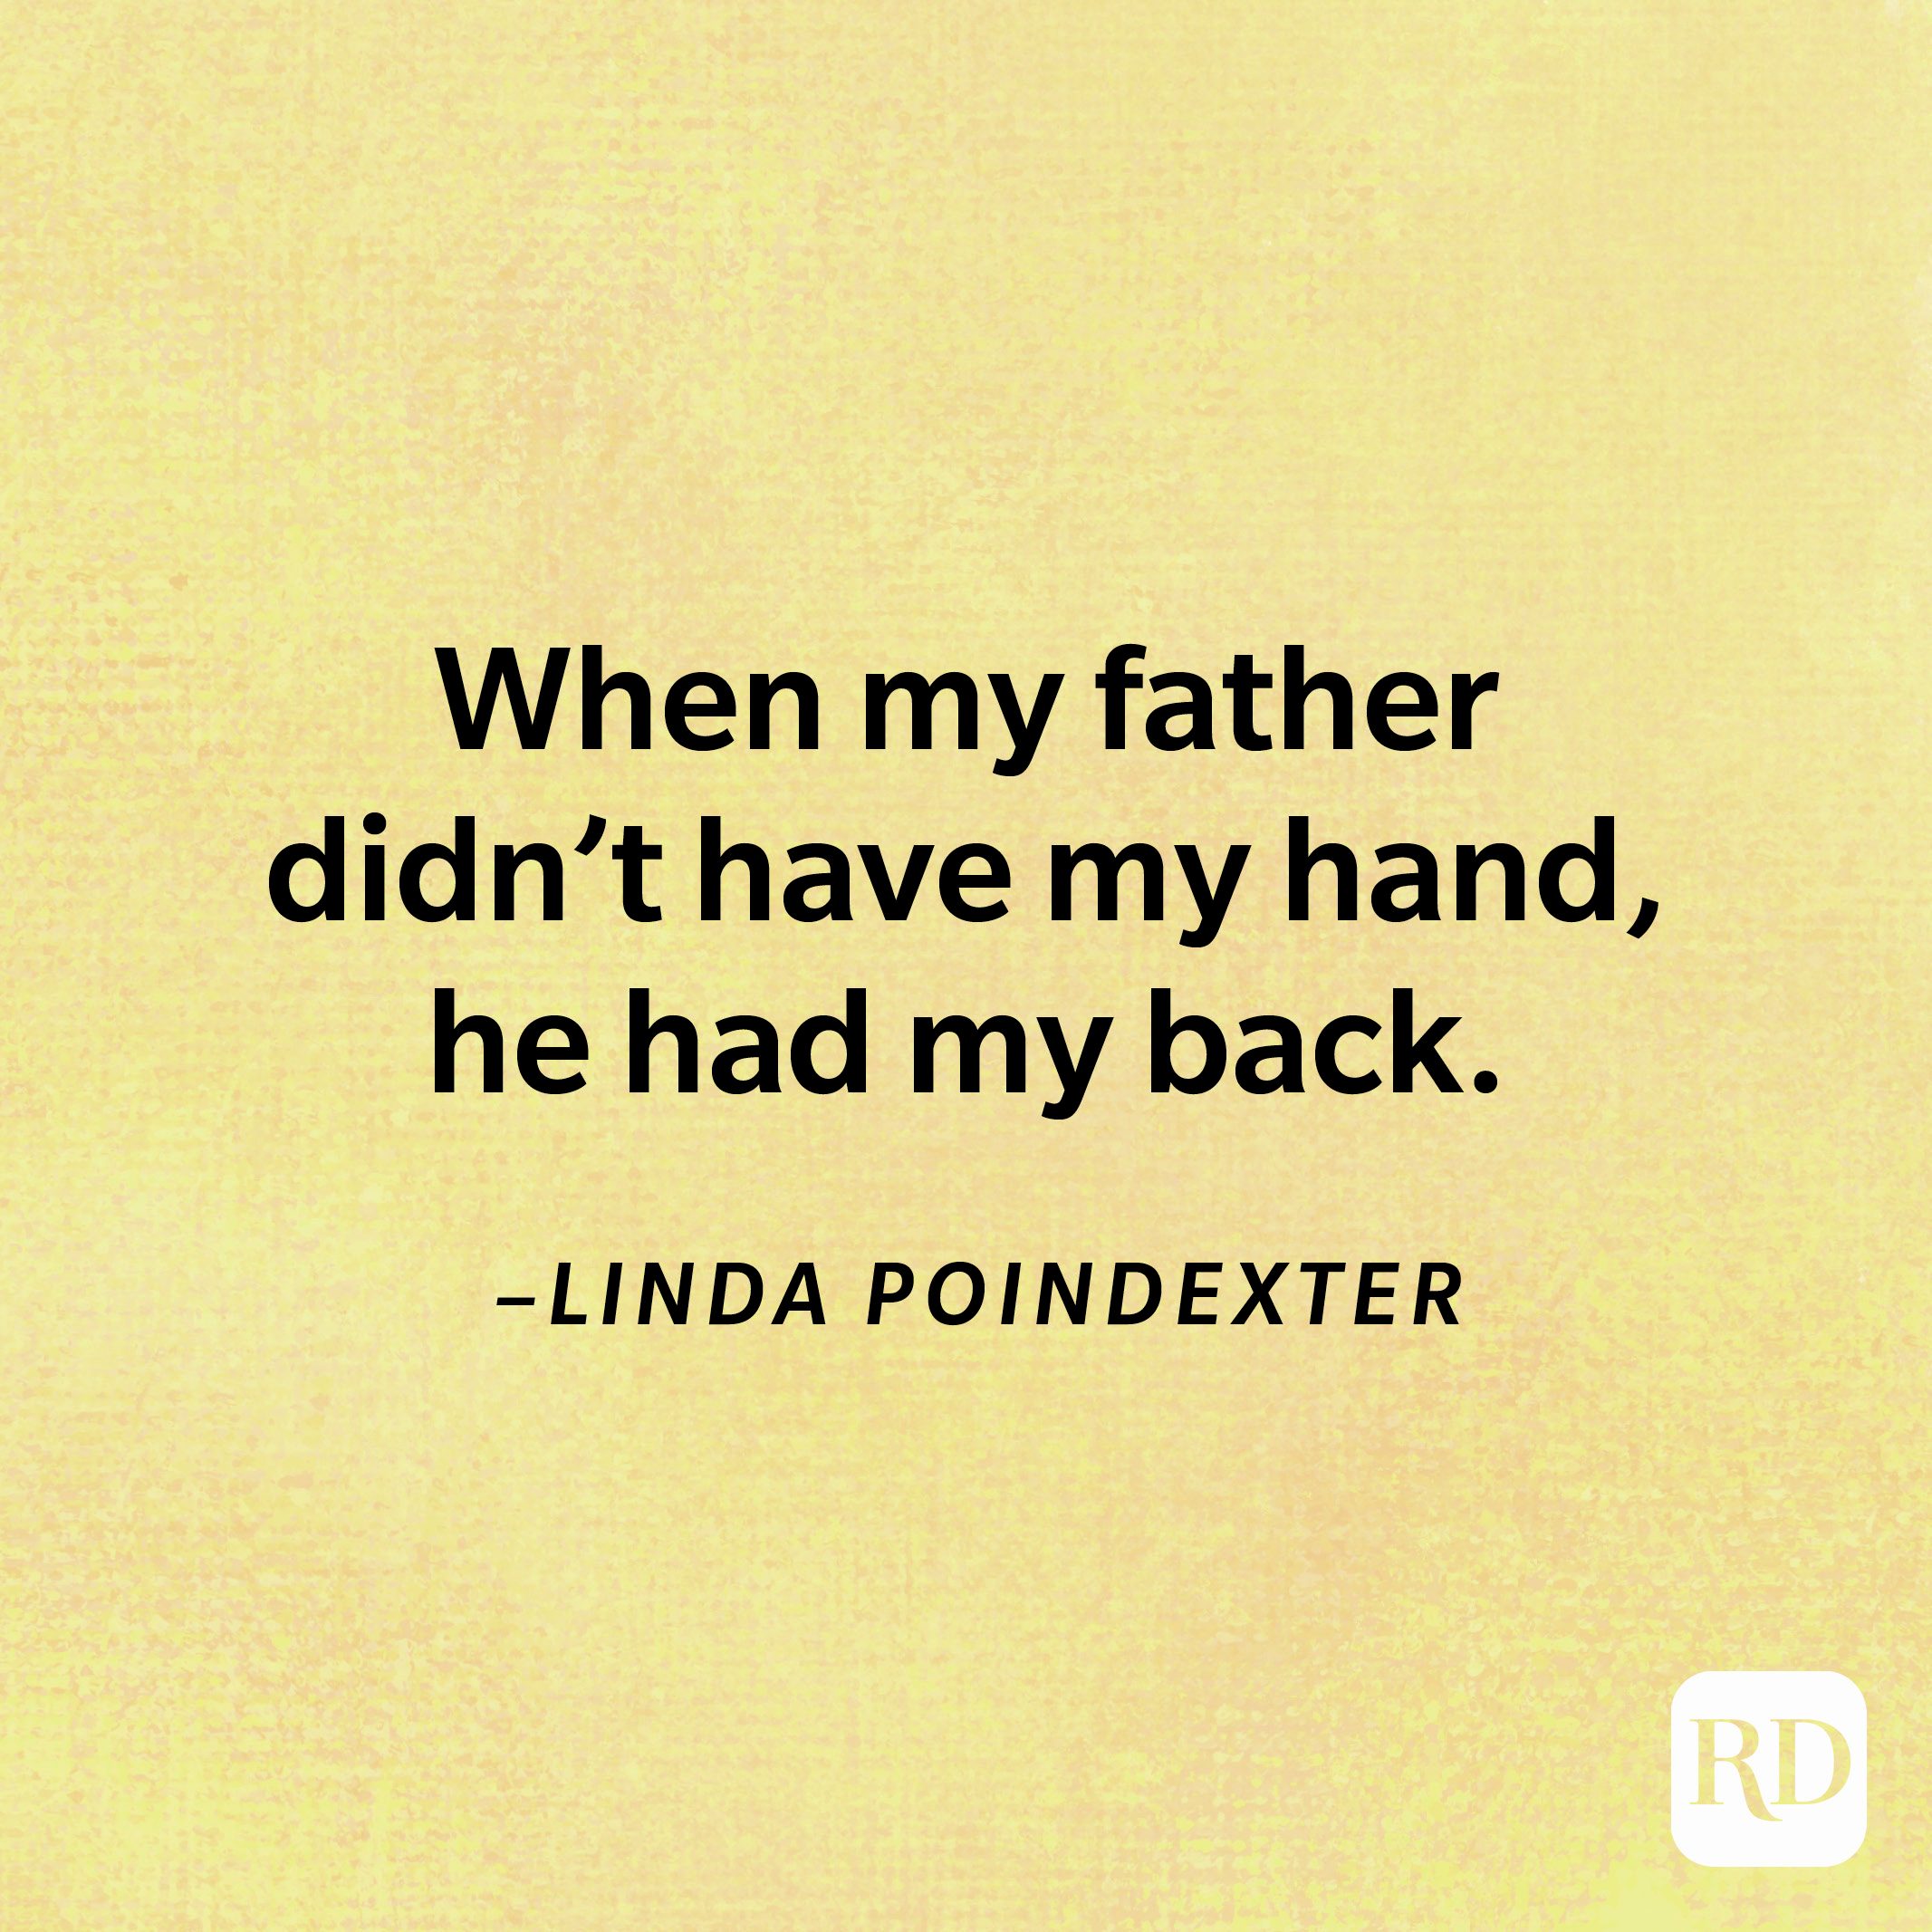 “When my father didn't have my hand, he had my back.”—Linda Poindexter